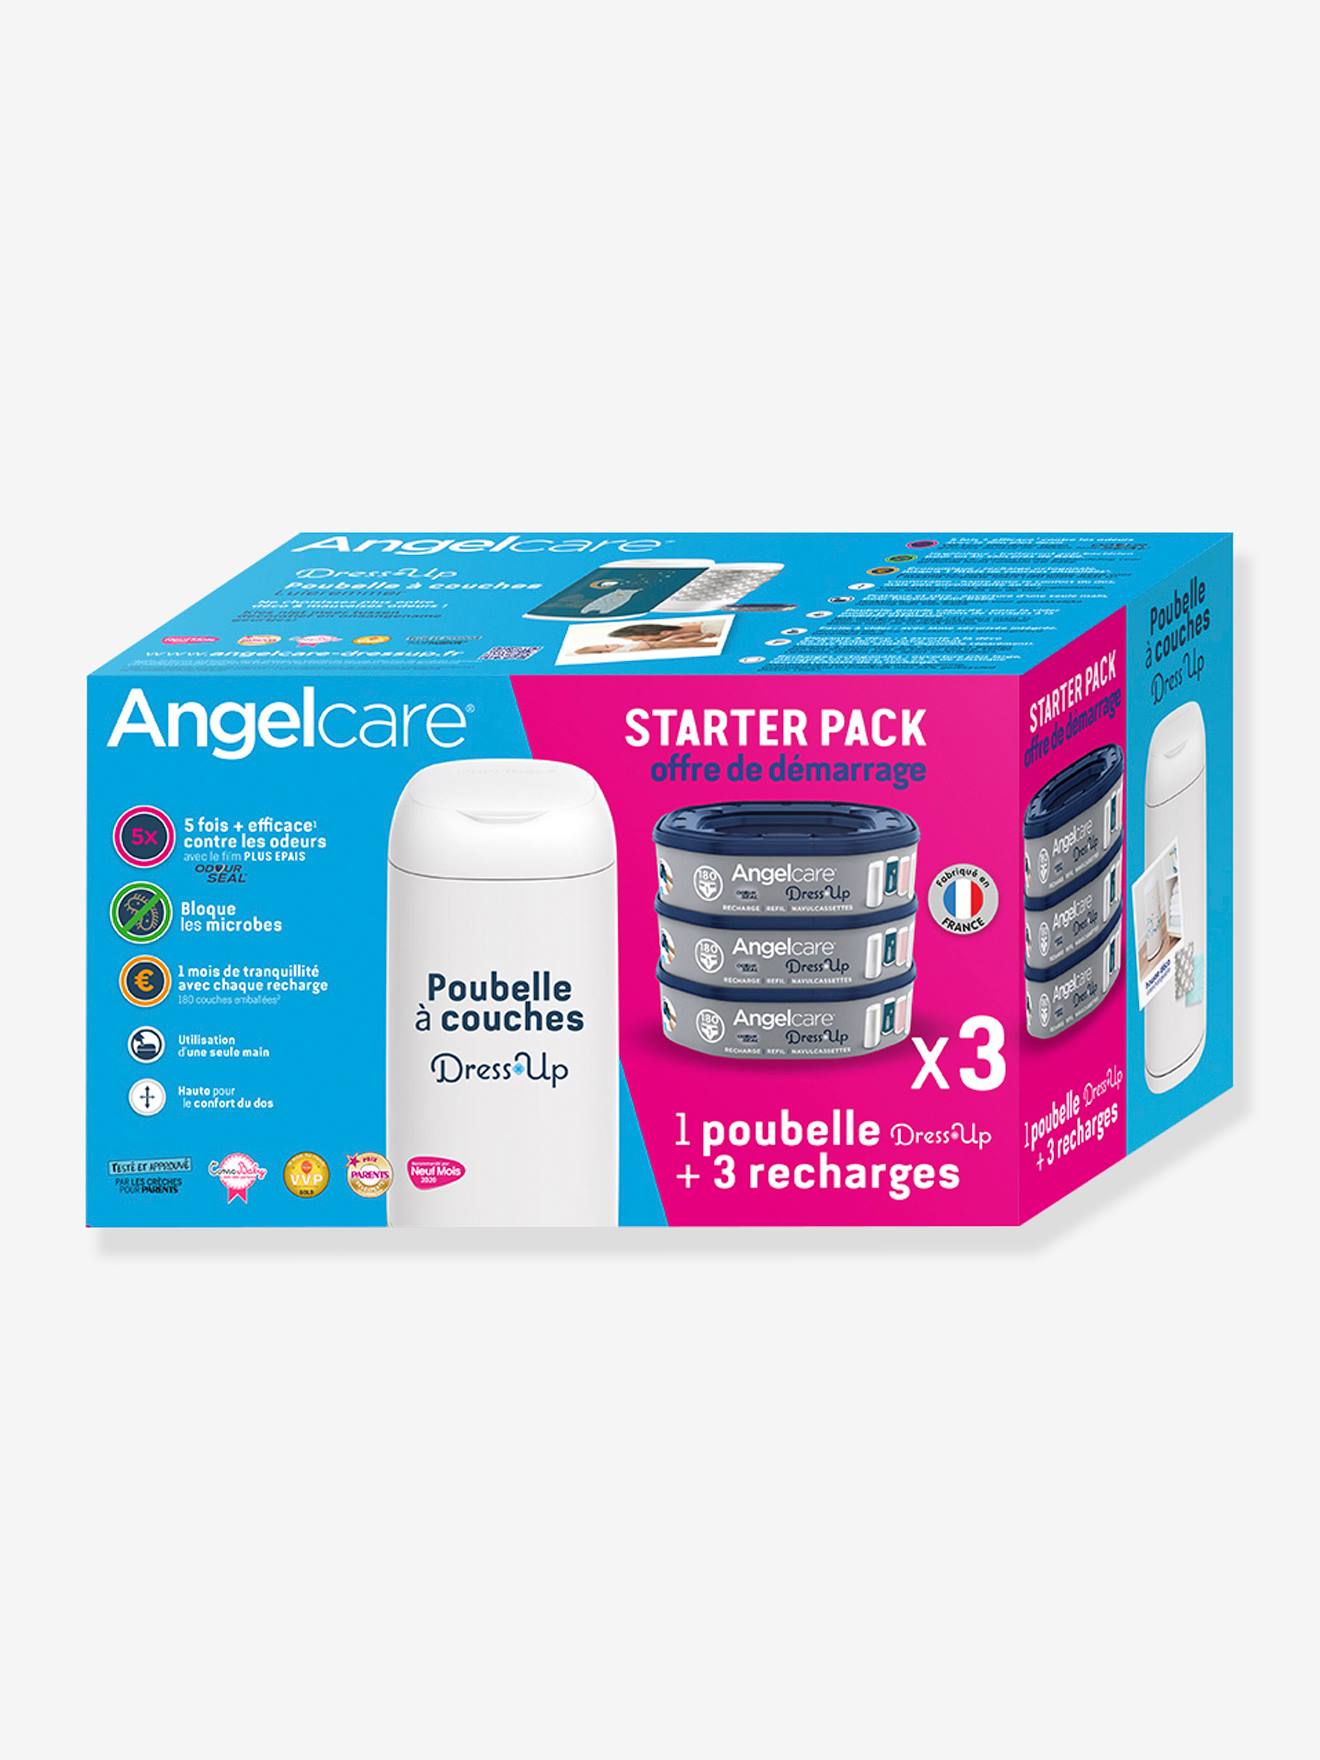 Starter pack poubelle à couches + 3 recharges Dress Up ANGELCARE - blanc,  Puériculture